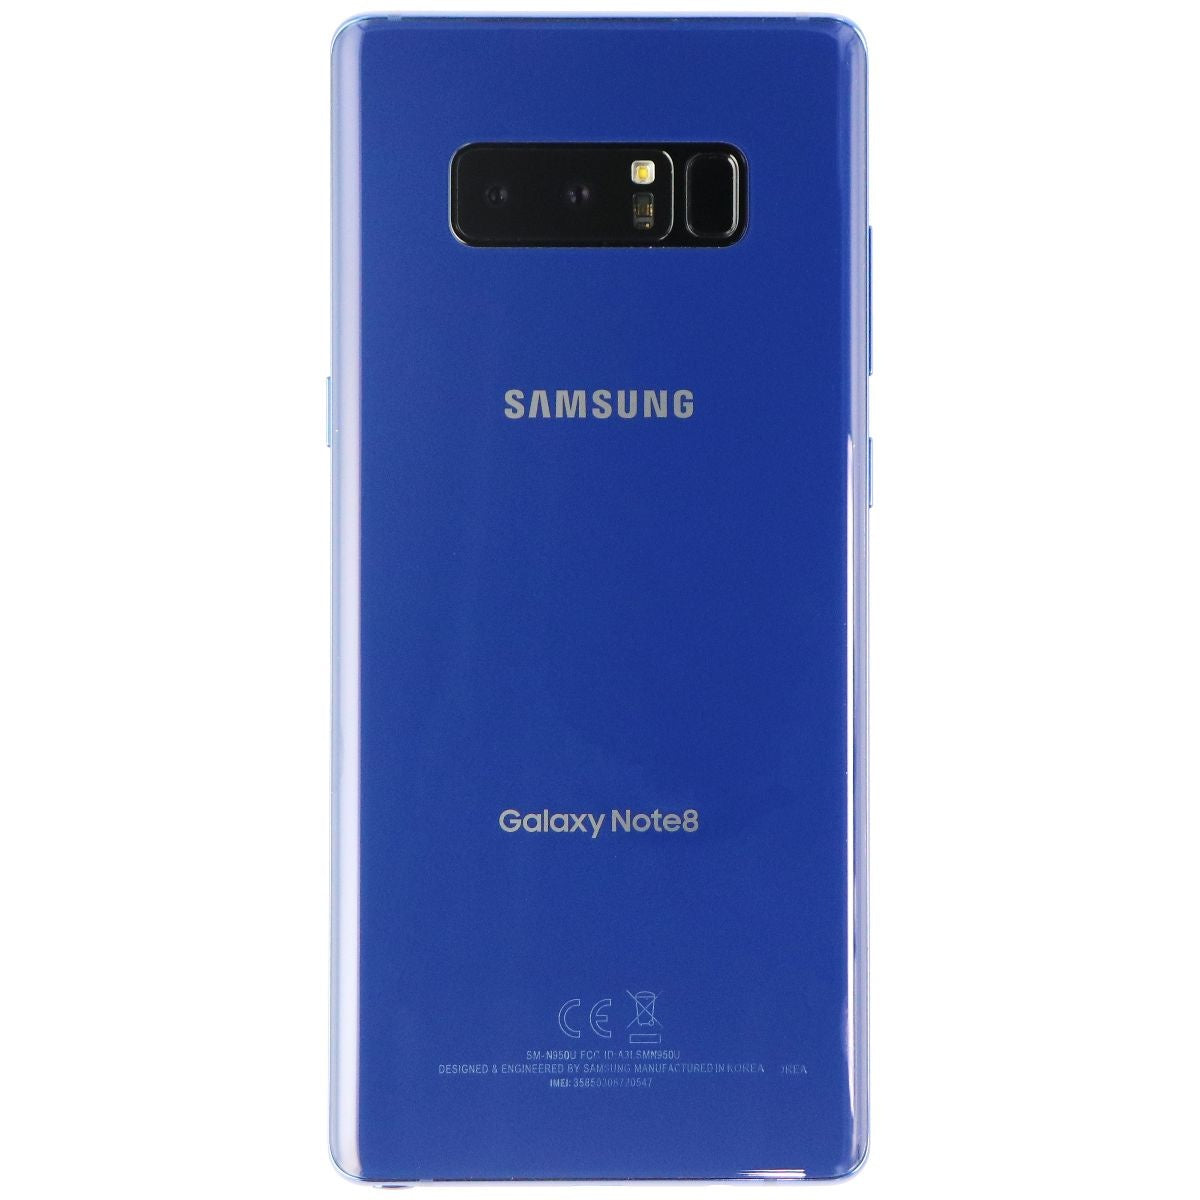 Samsung Galaxy Note8 (6.3-inch) (SM-N950U) Sprint Only - 64GB/Deep Sea Blue Cell Phones & Smartphones Samsung    - Simple Cell Bulk Wholesale Pricing - USA Seller